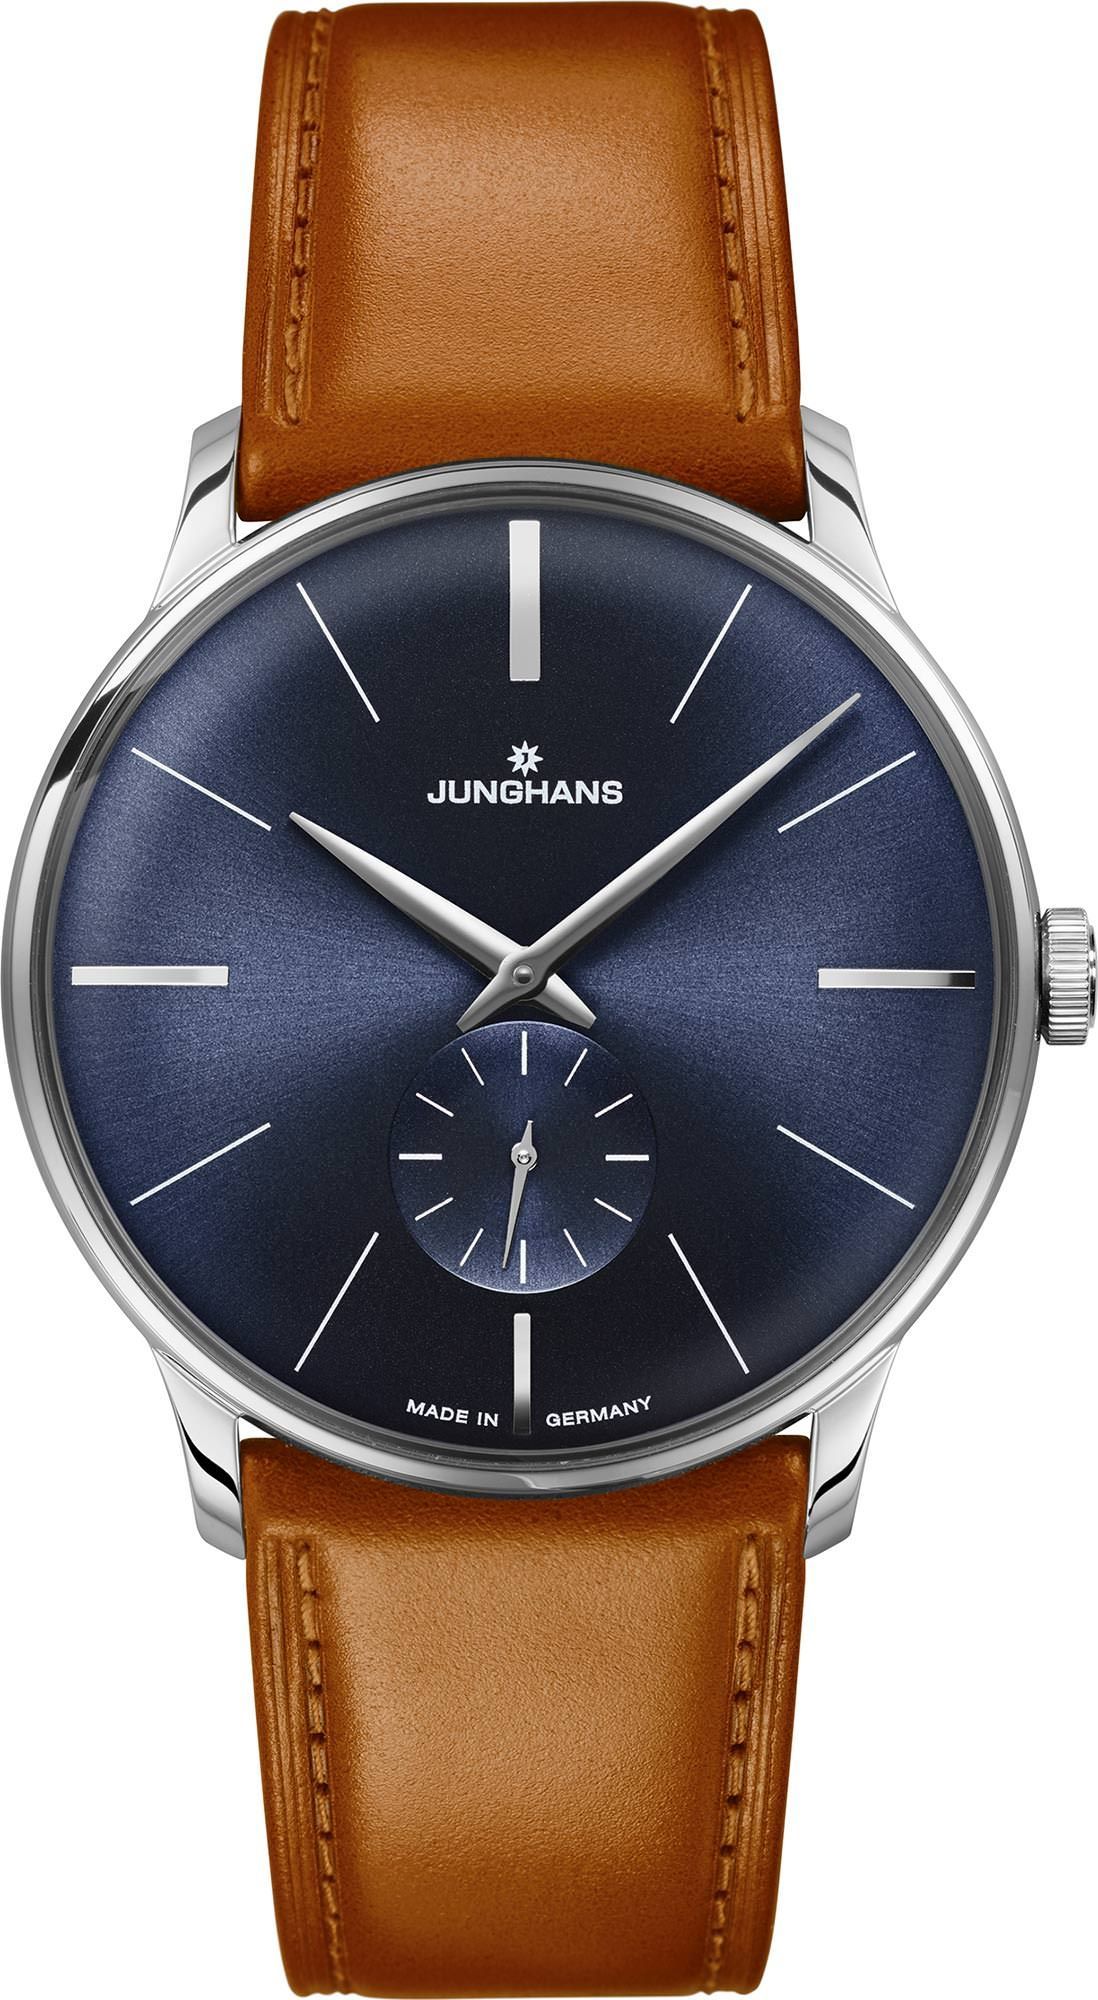 Junghans Meister Meister Hand Winding Blue Dial 37.7 mm Manual Winding Watch For Men - 1